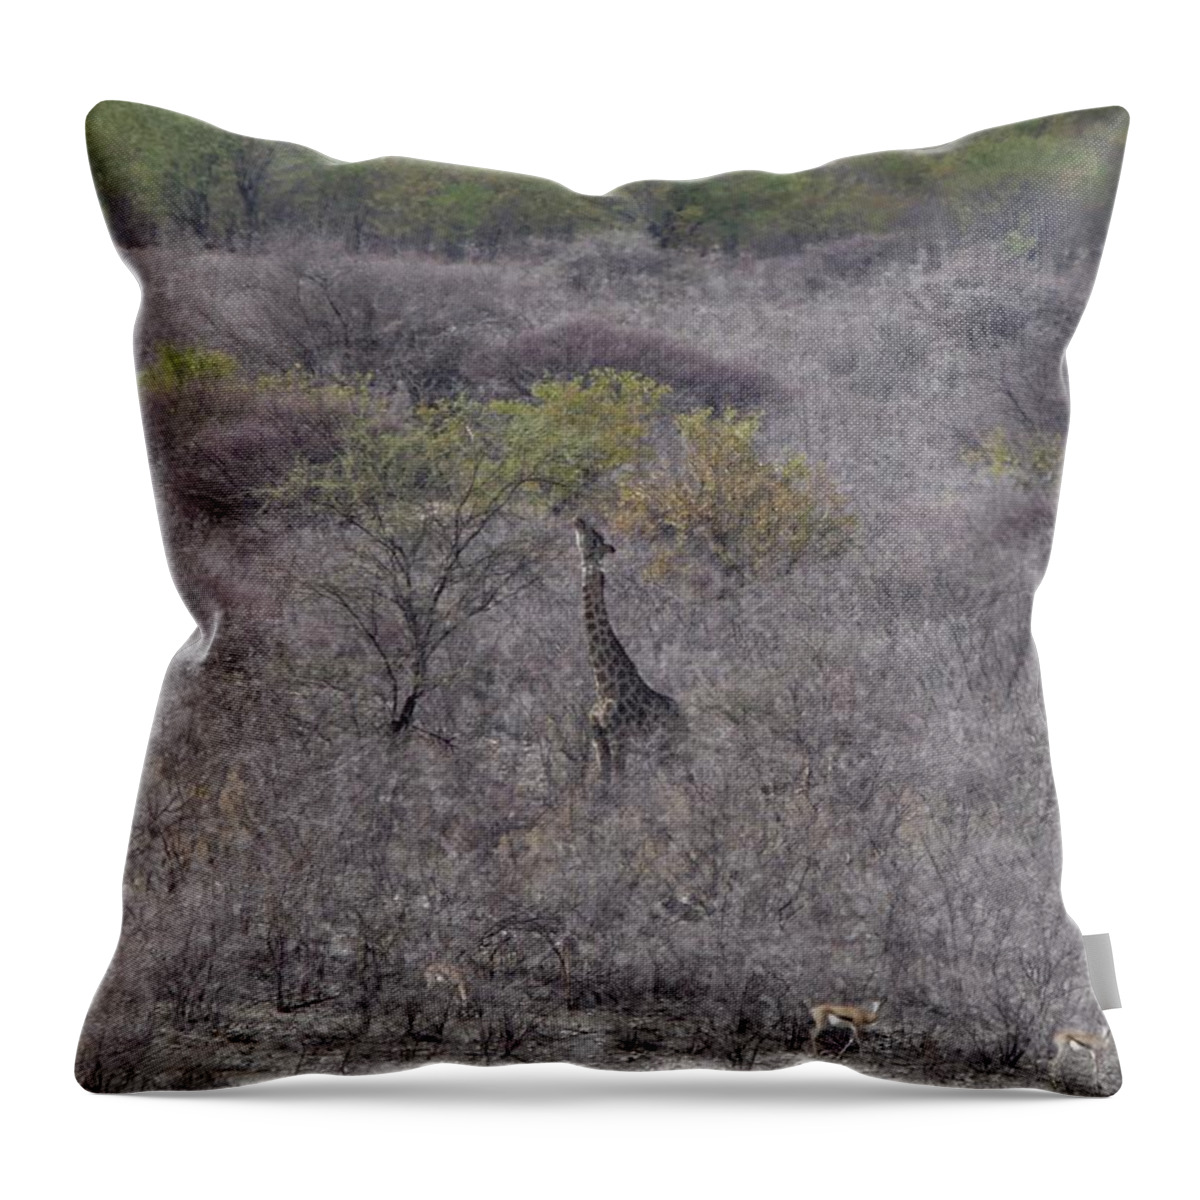 Giraffe Throw Pillow featuring the photograph Afternoon Treat by Ernest Echols